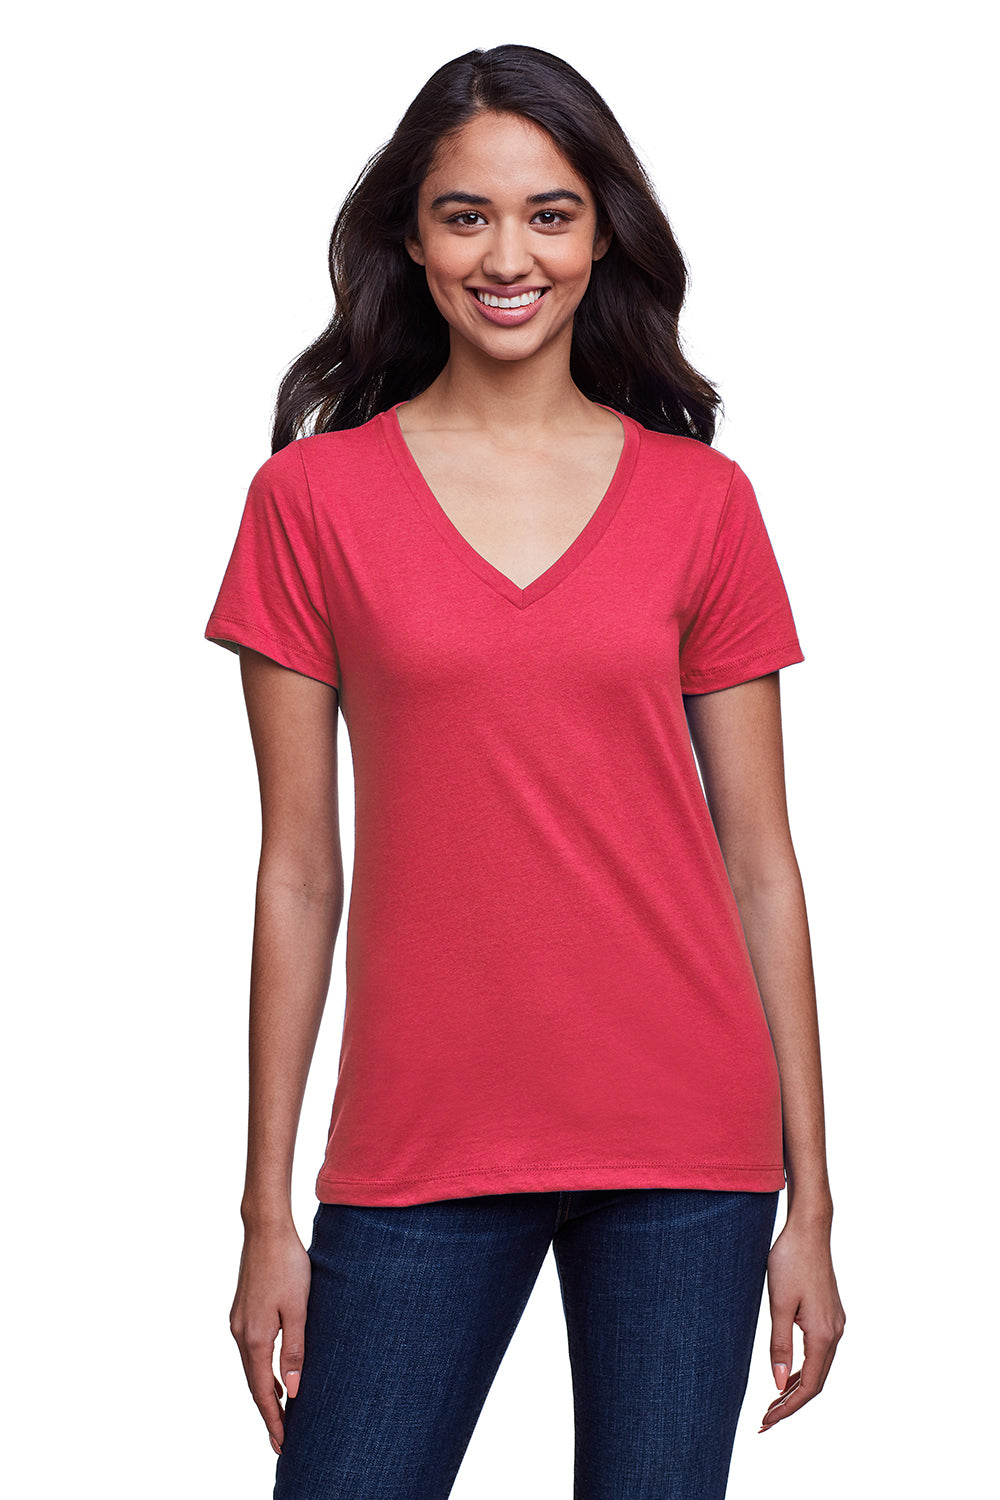 Next Level N4240 Womens Eco Performance Moisture Wicking Short Sleeve V-Neck T-Shirt Heather Red Front